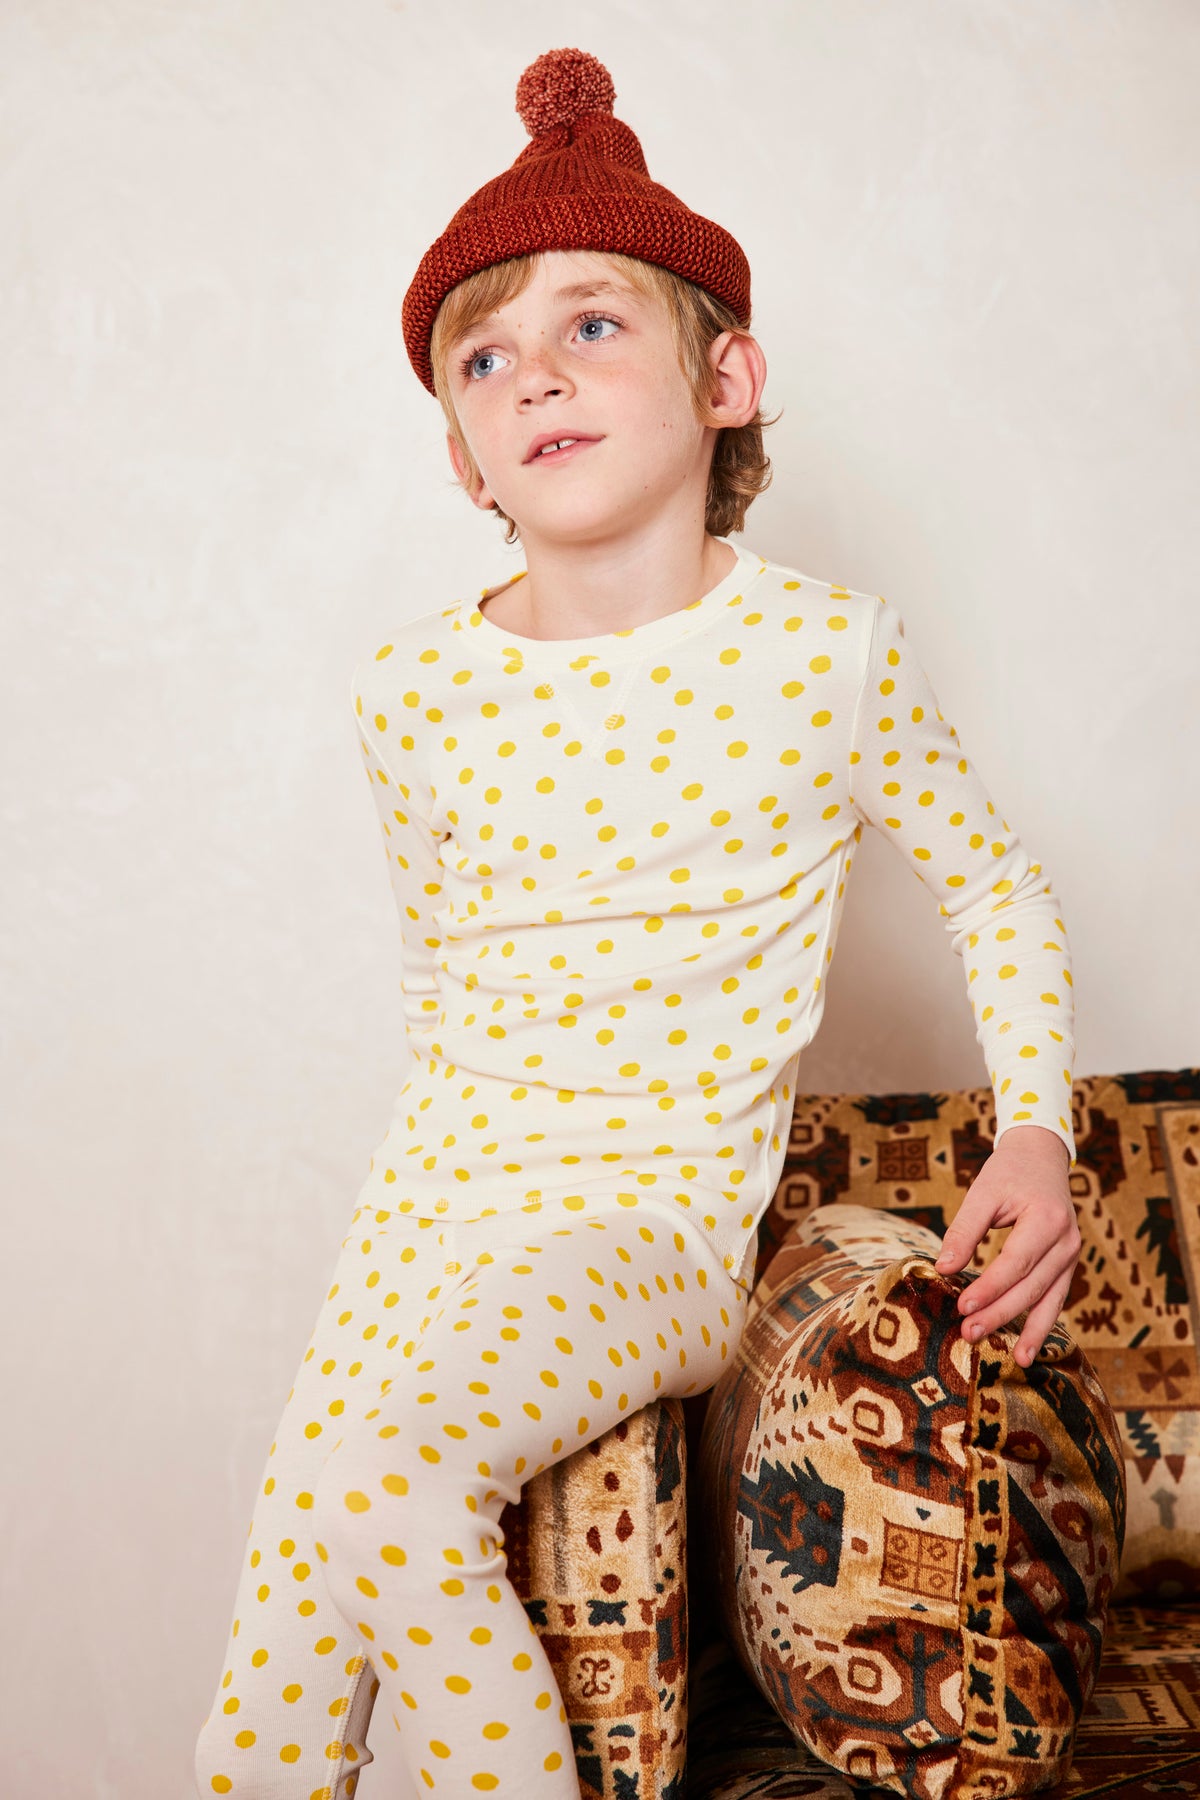 Pajama Set - Winter Cream Polka Dot+Model is 47 inches tall, 45lbs, wearing a size 6-7y